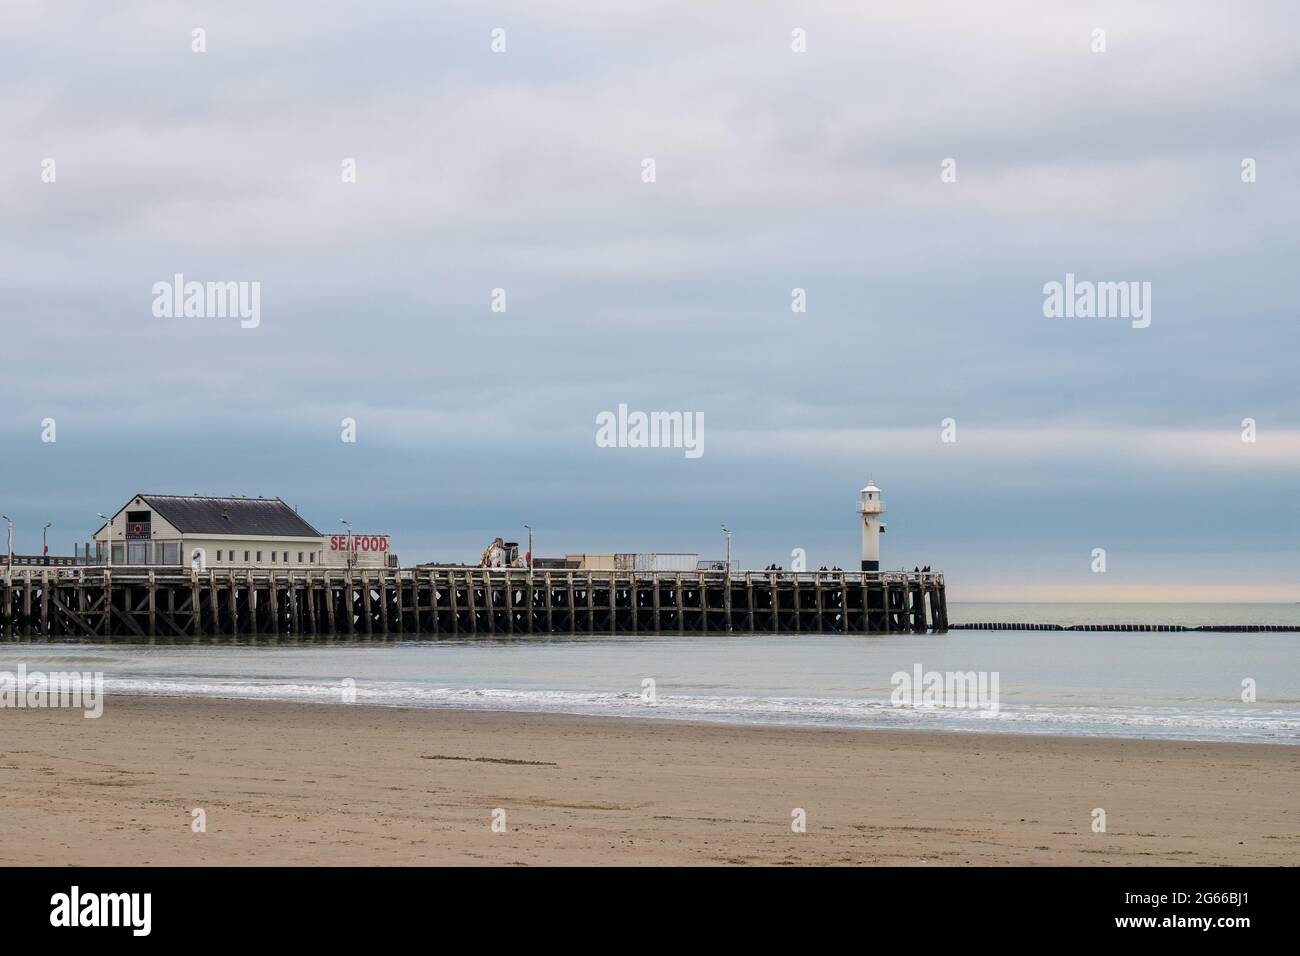 The beach of Blankenberge (Belgium) with old wooden pier and lighthouse in the background. Stock Photo